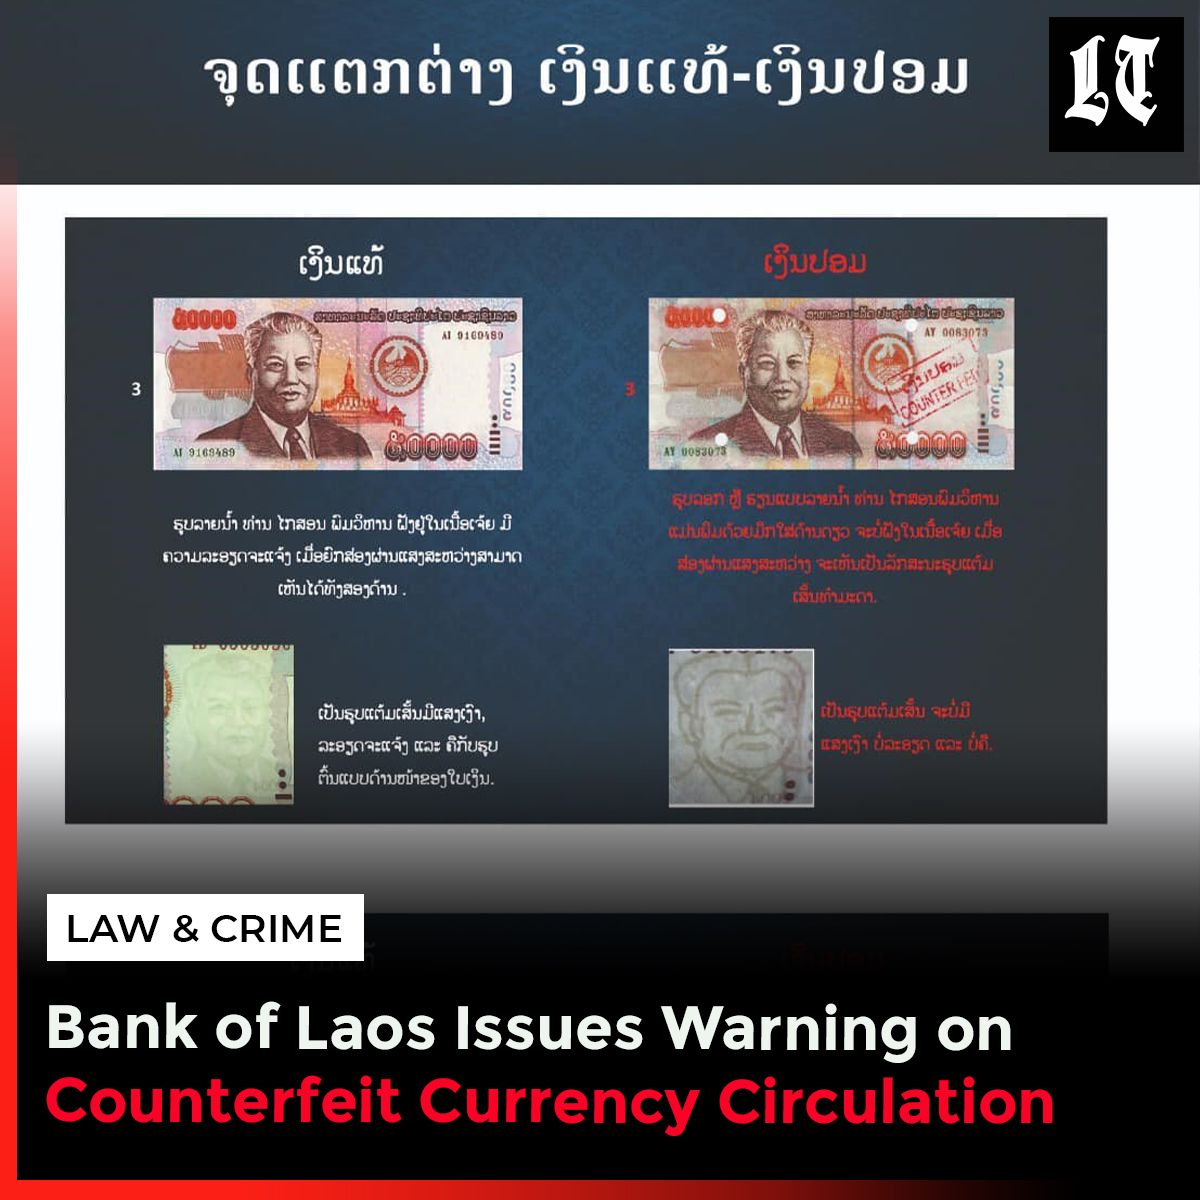 The Bank of Laos has alerted the public about counterfeit LAK 50,000 notes from 2004, particularly prevalent in the northern region, notably impacting Bokeo province. 

Read more:buff.ly/3UlIYNR